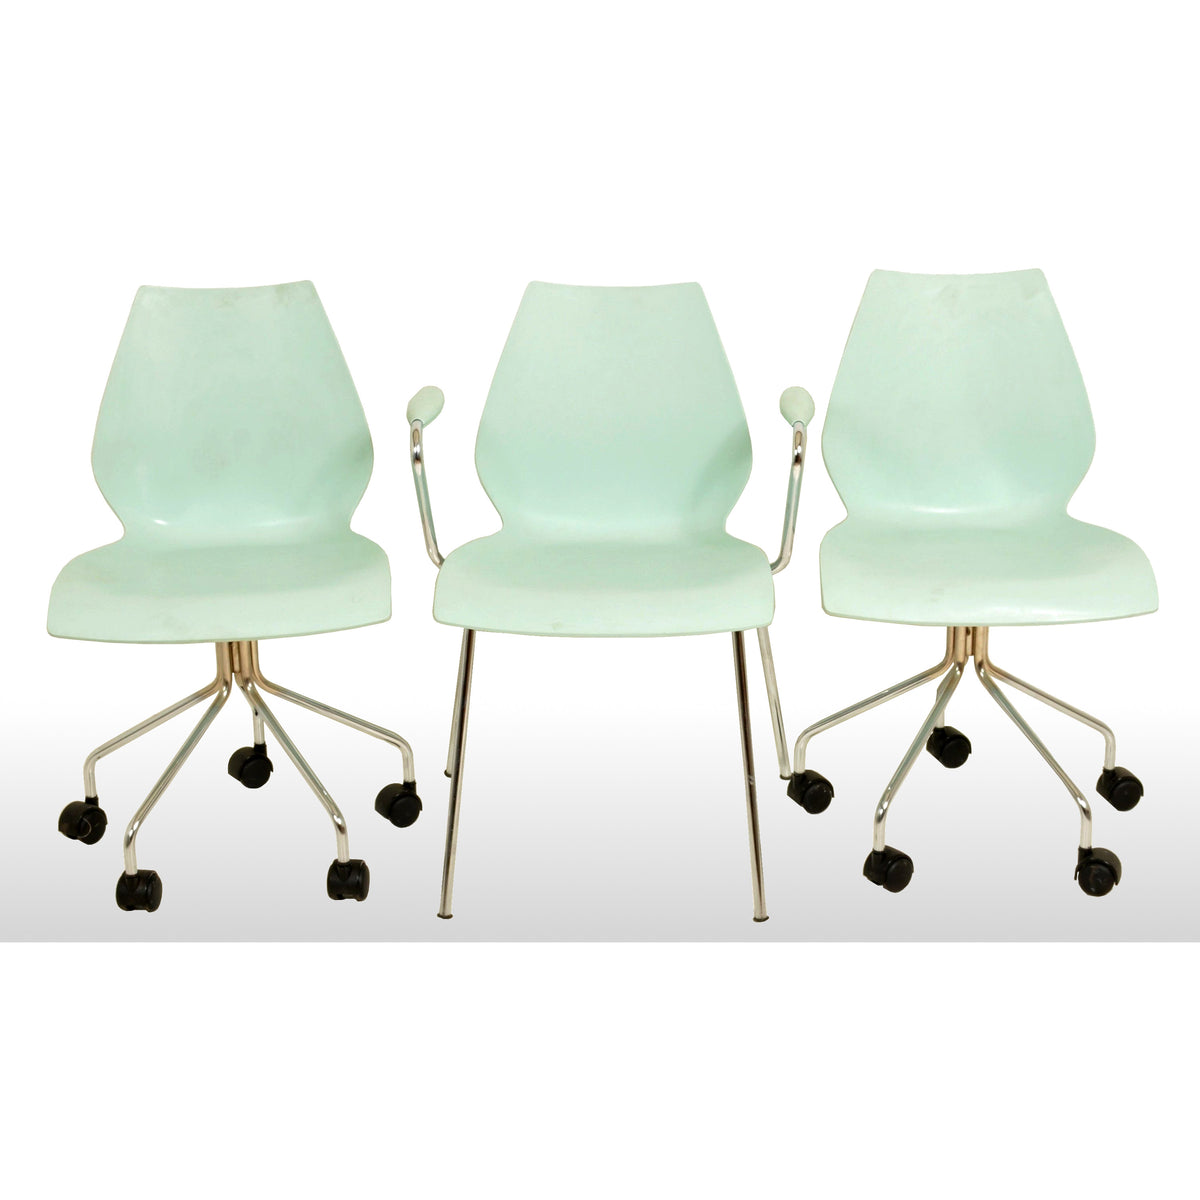 Set of 3 Mid-Century Modern Maui Chairs by Vico Magistretti for Kartell